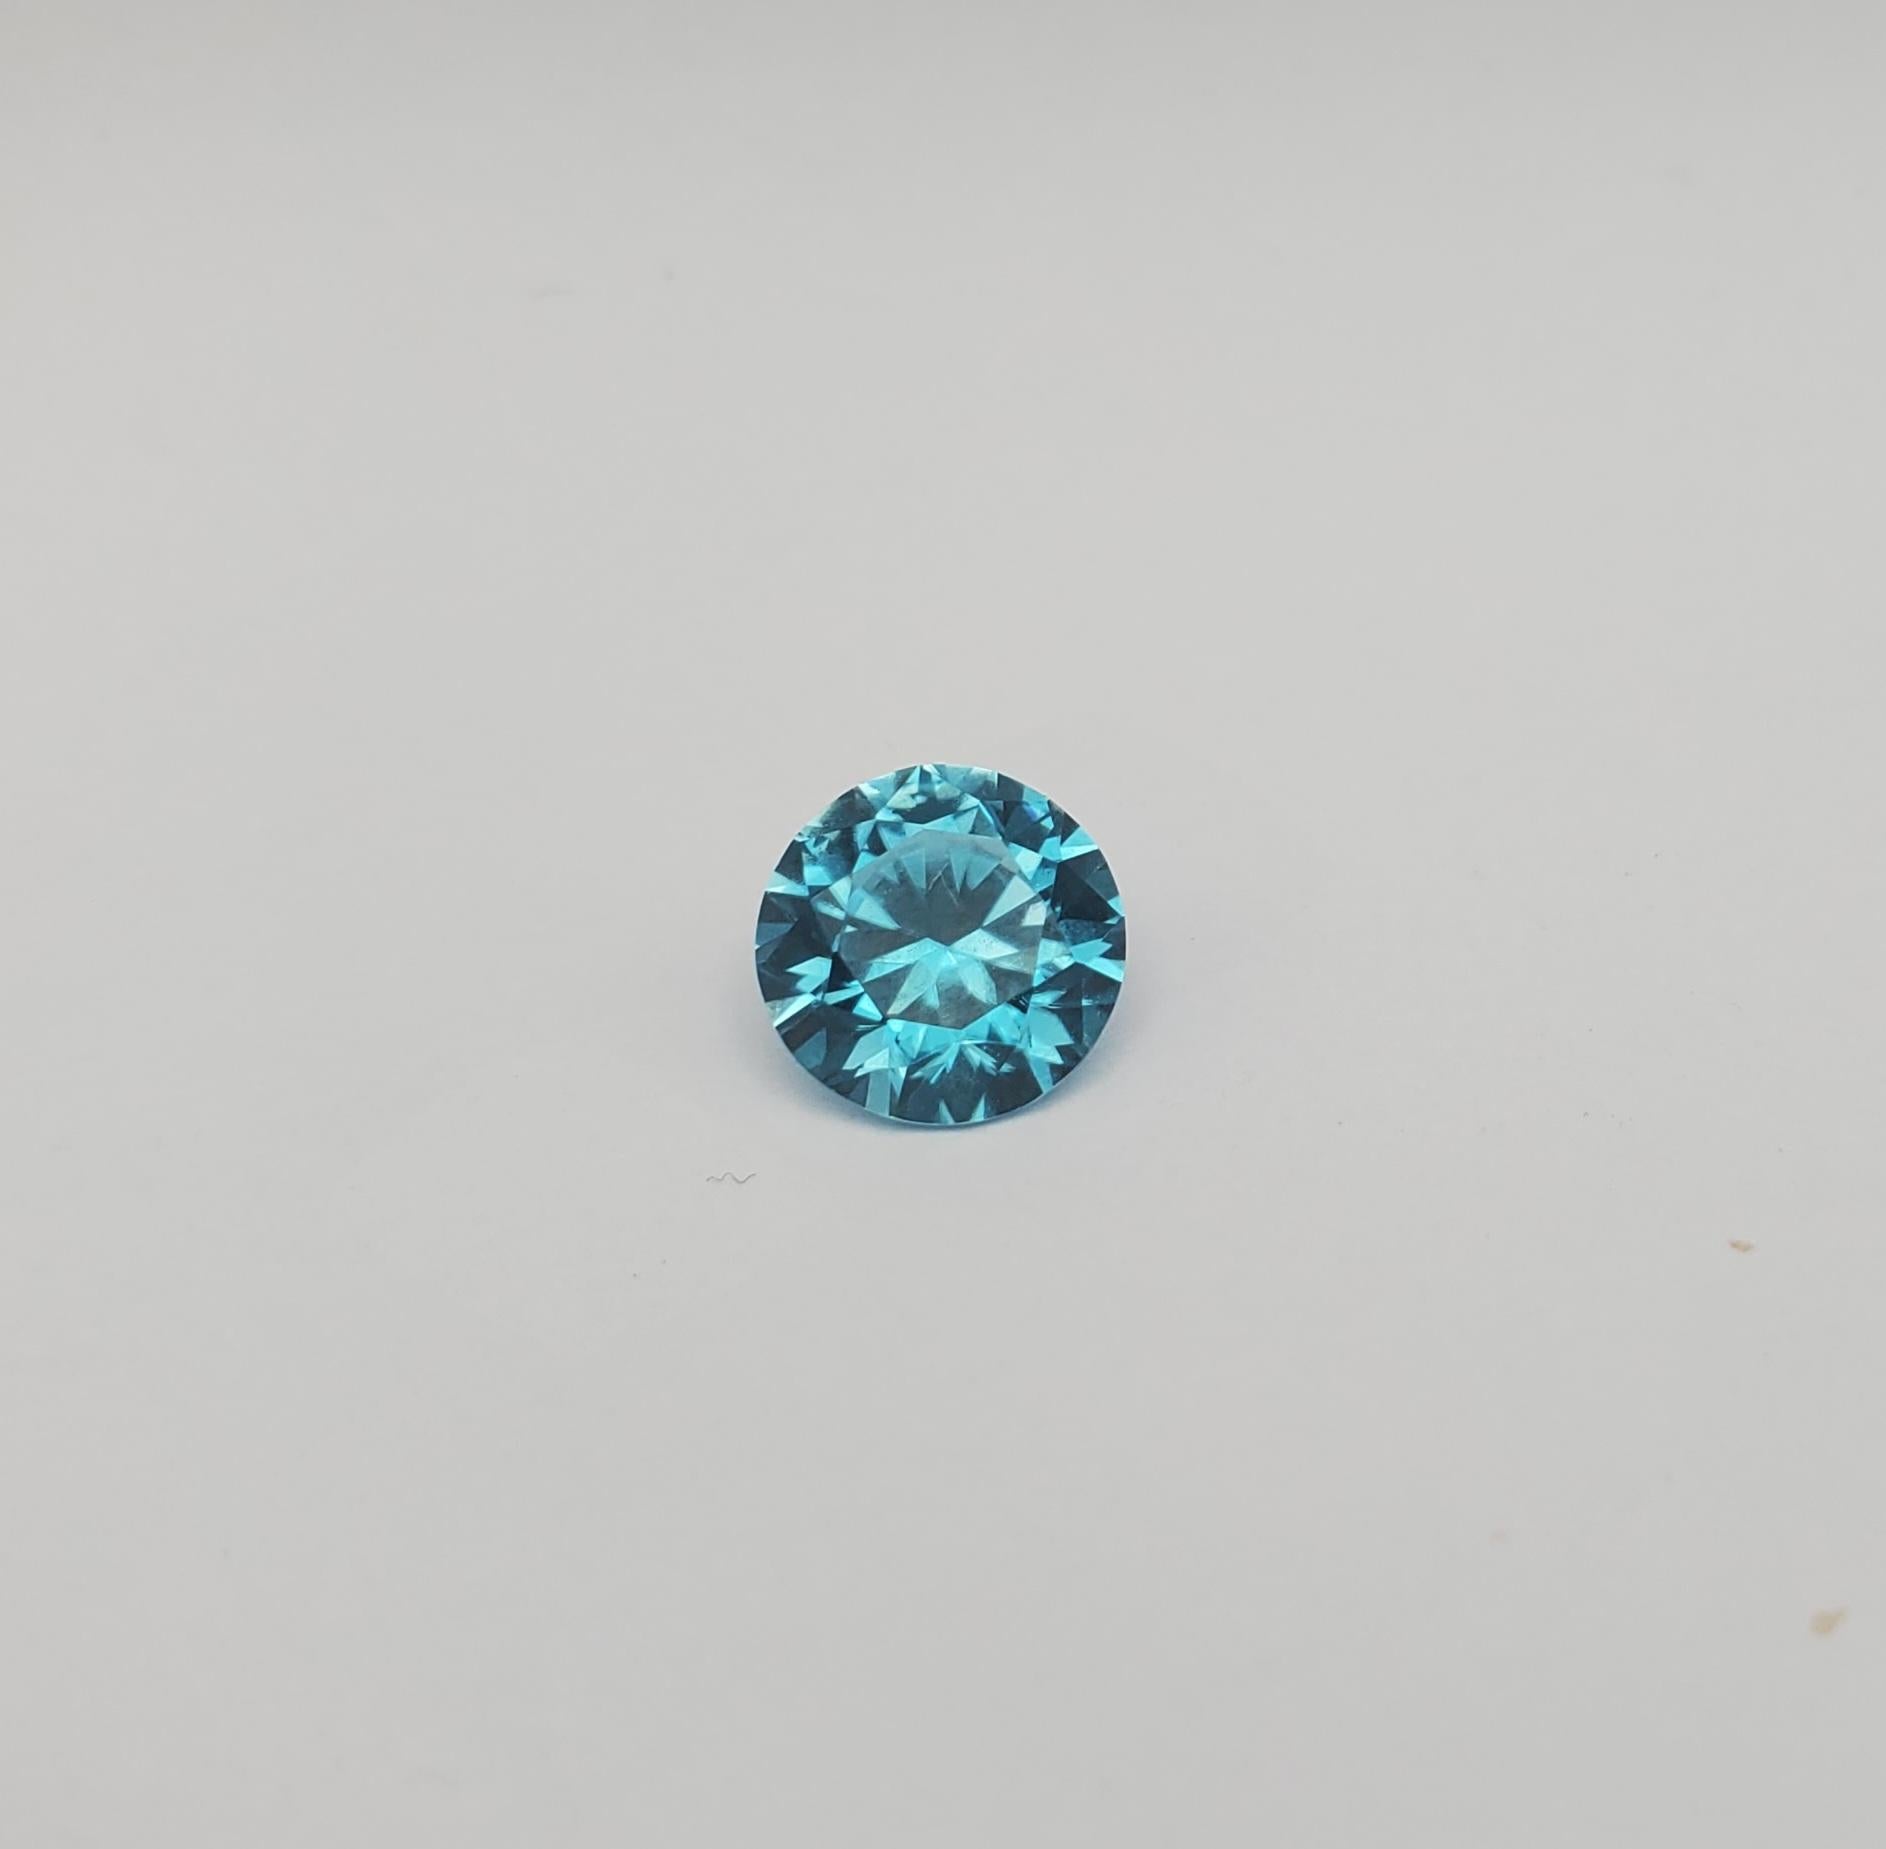 Incredible 2.93ct Round Blue Zircon  For Sale 6